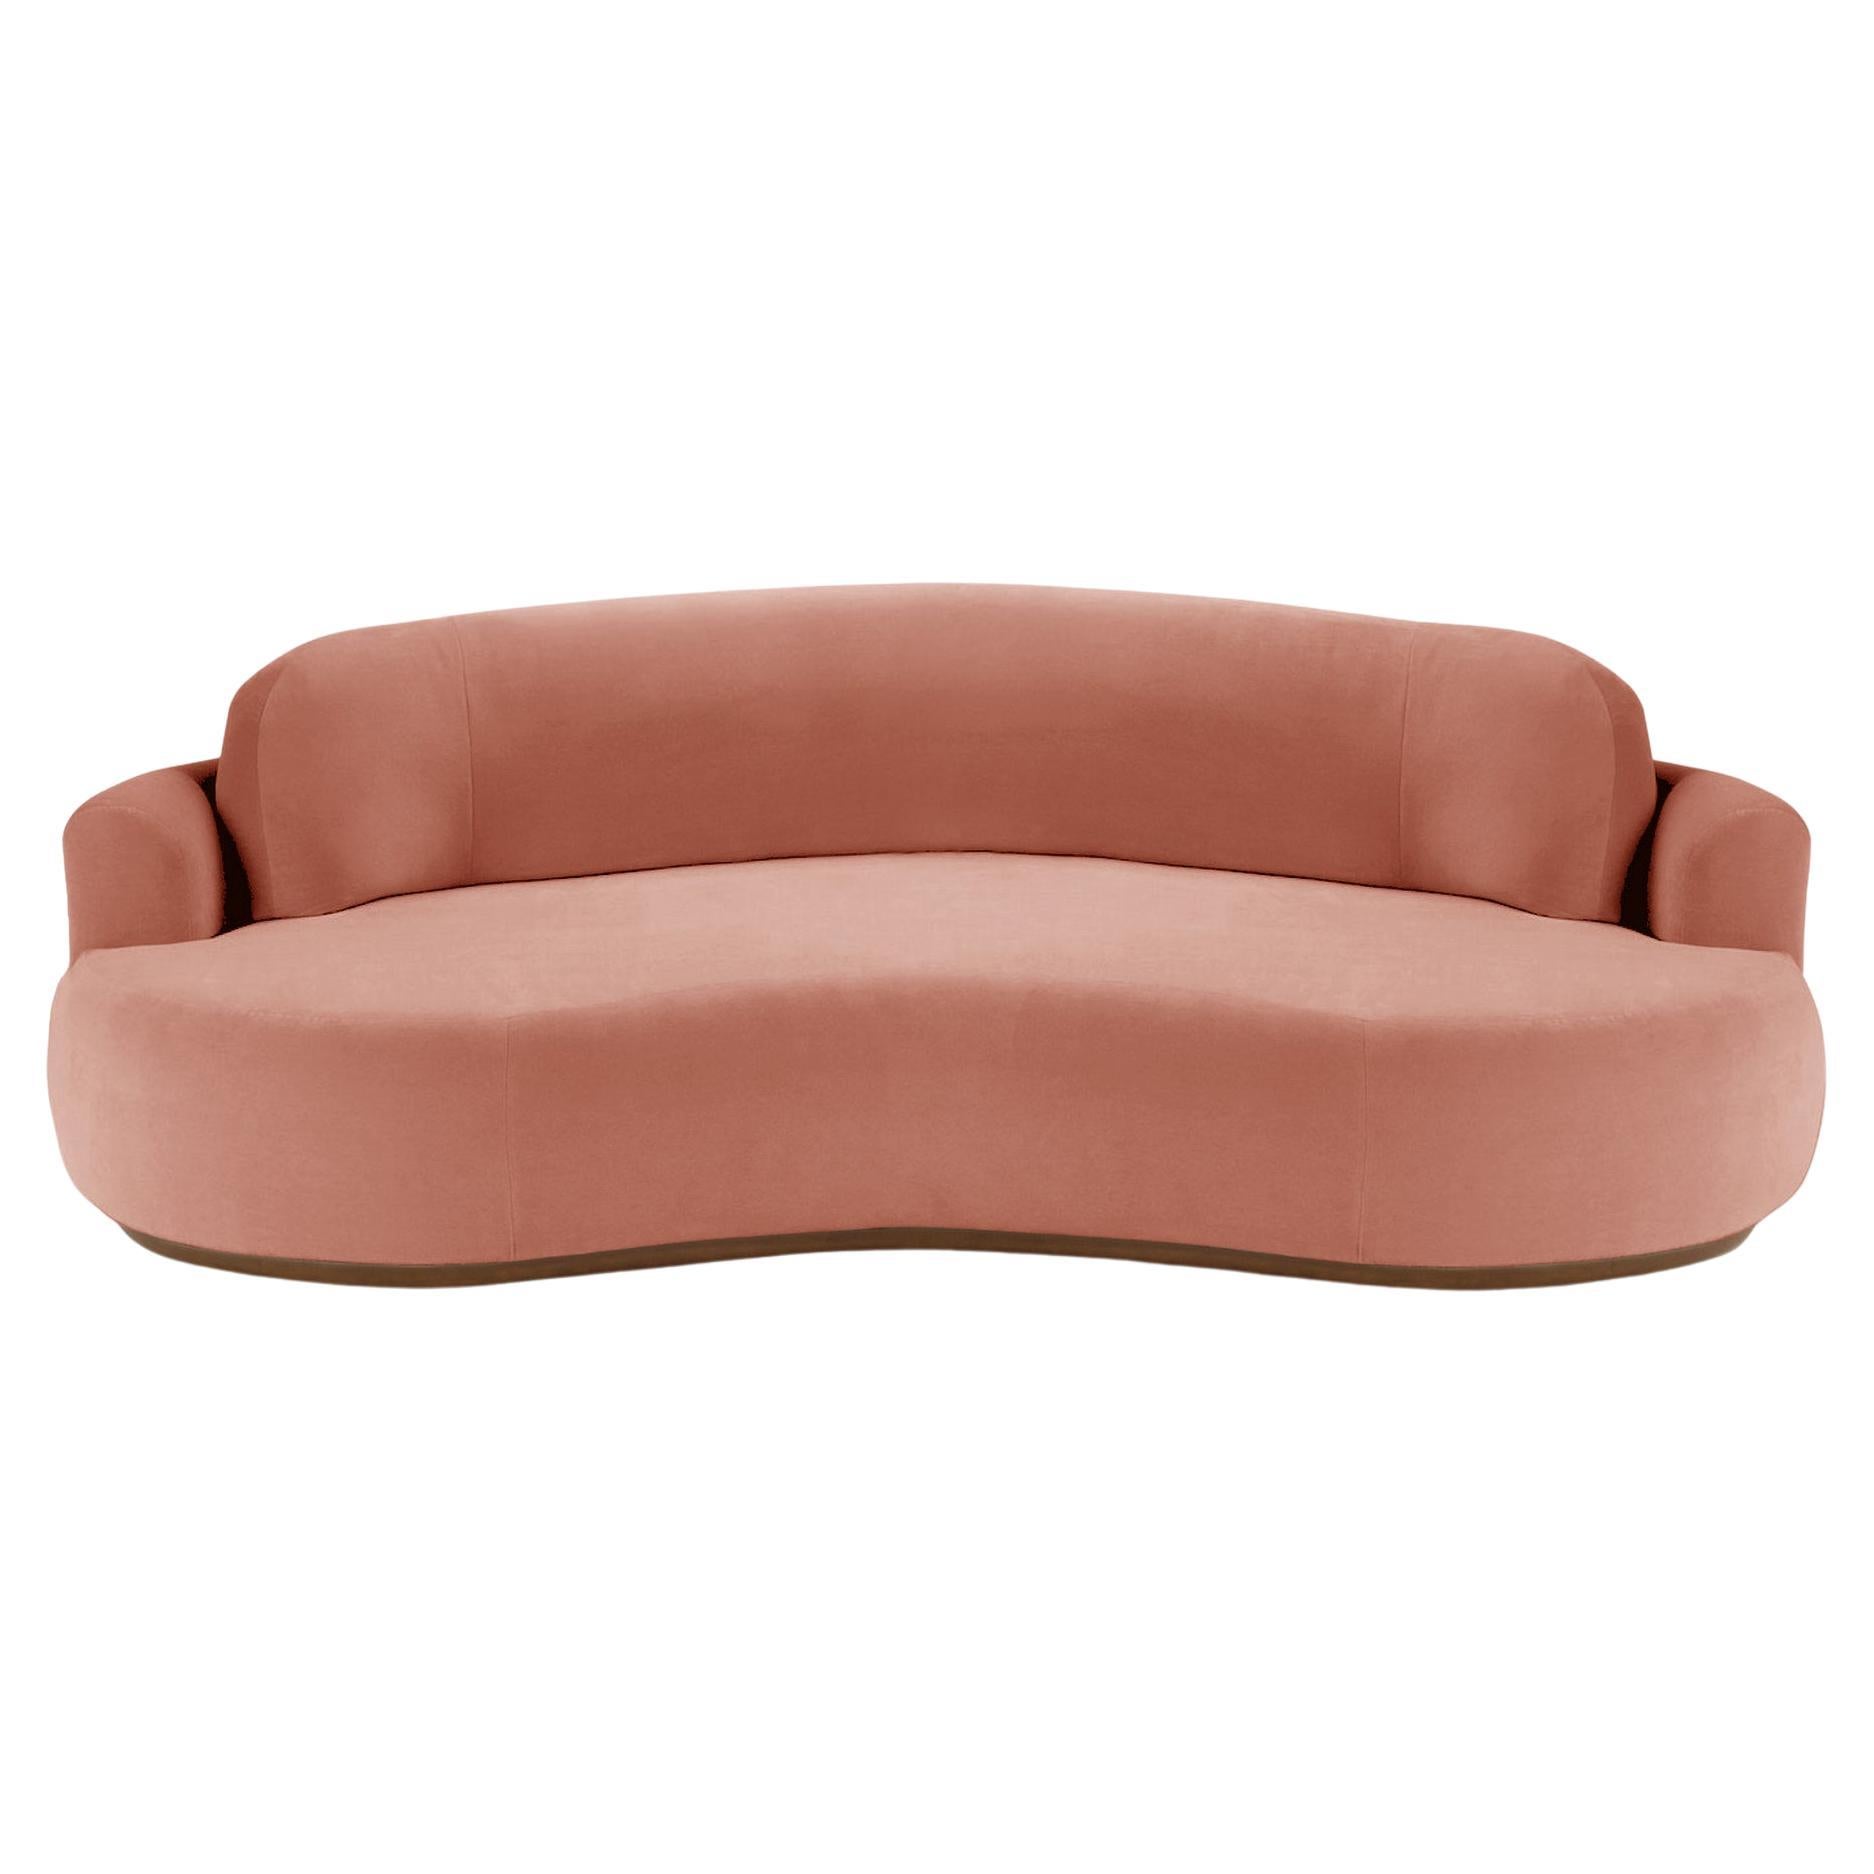 Naked Round Sofa, Medium with Beech Ash-056-1 and Paris Brick For Sale